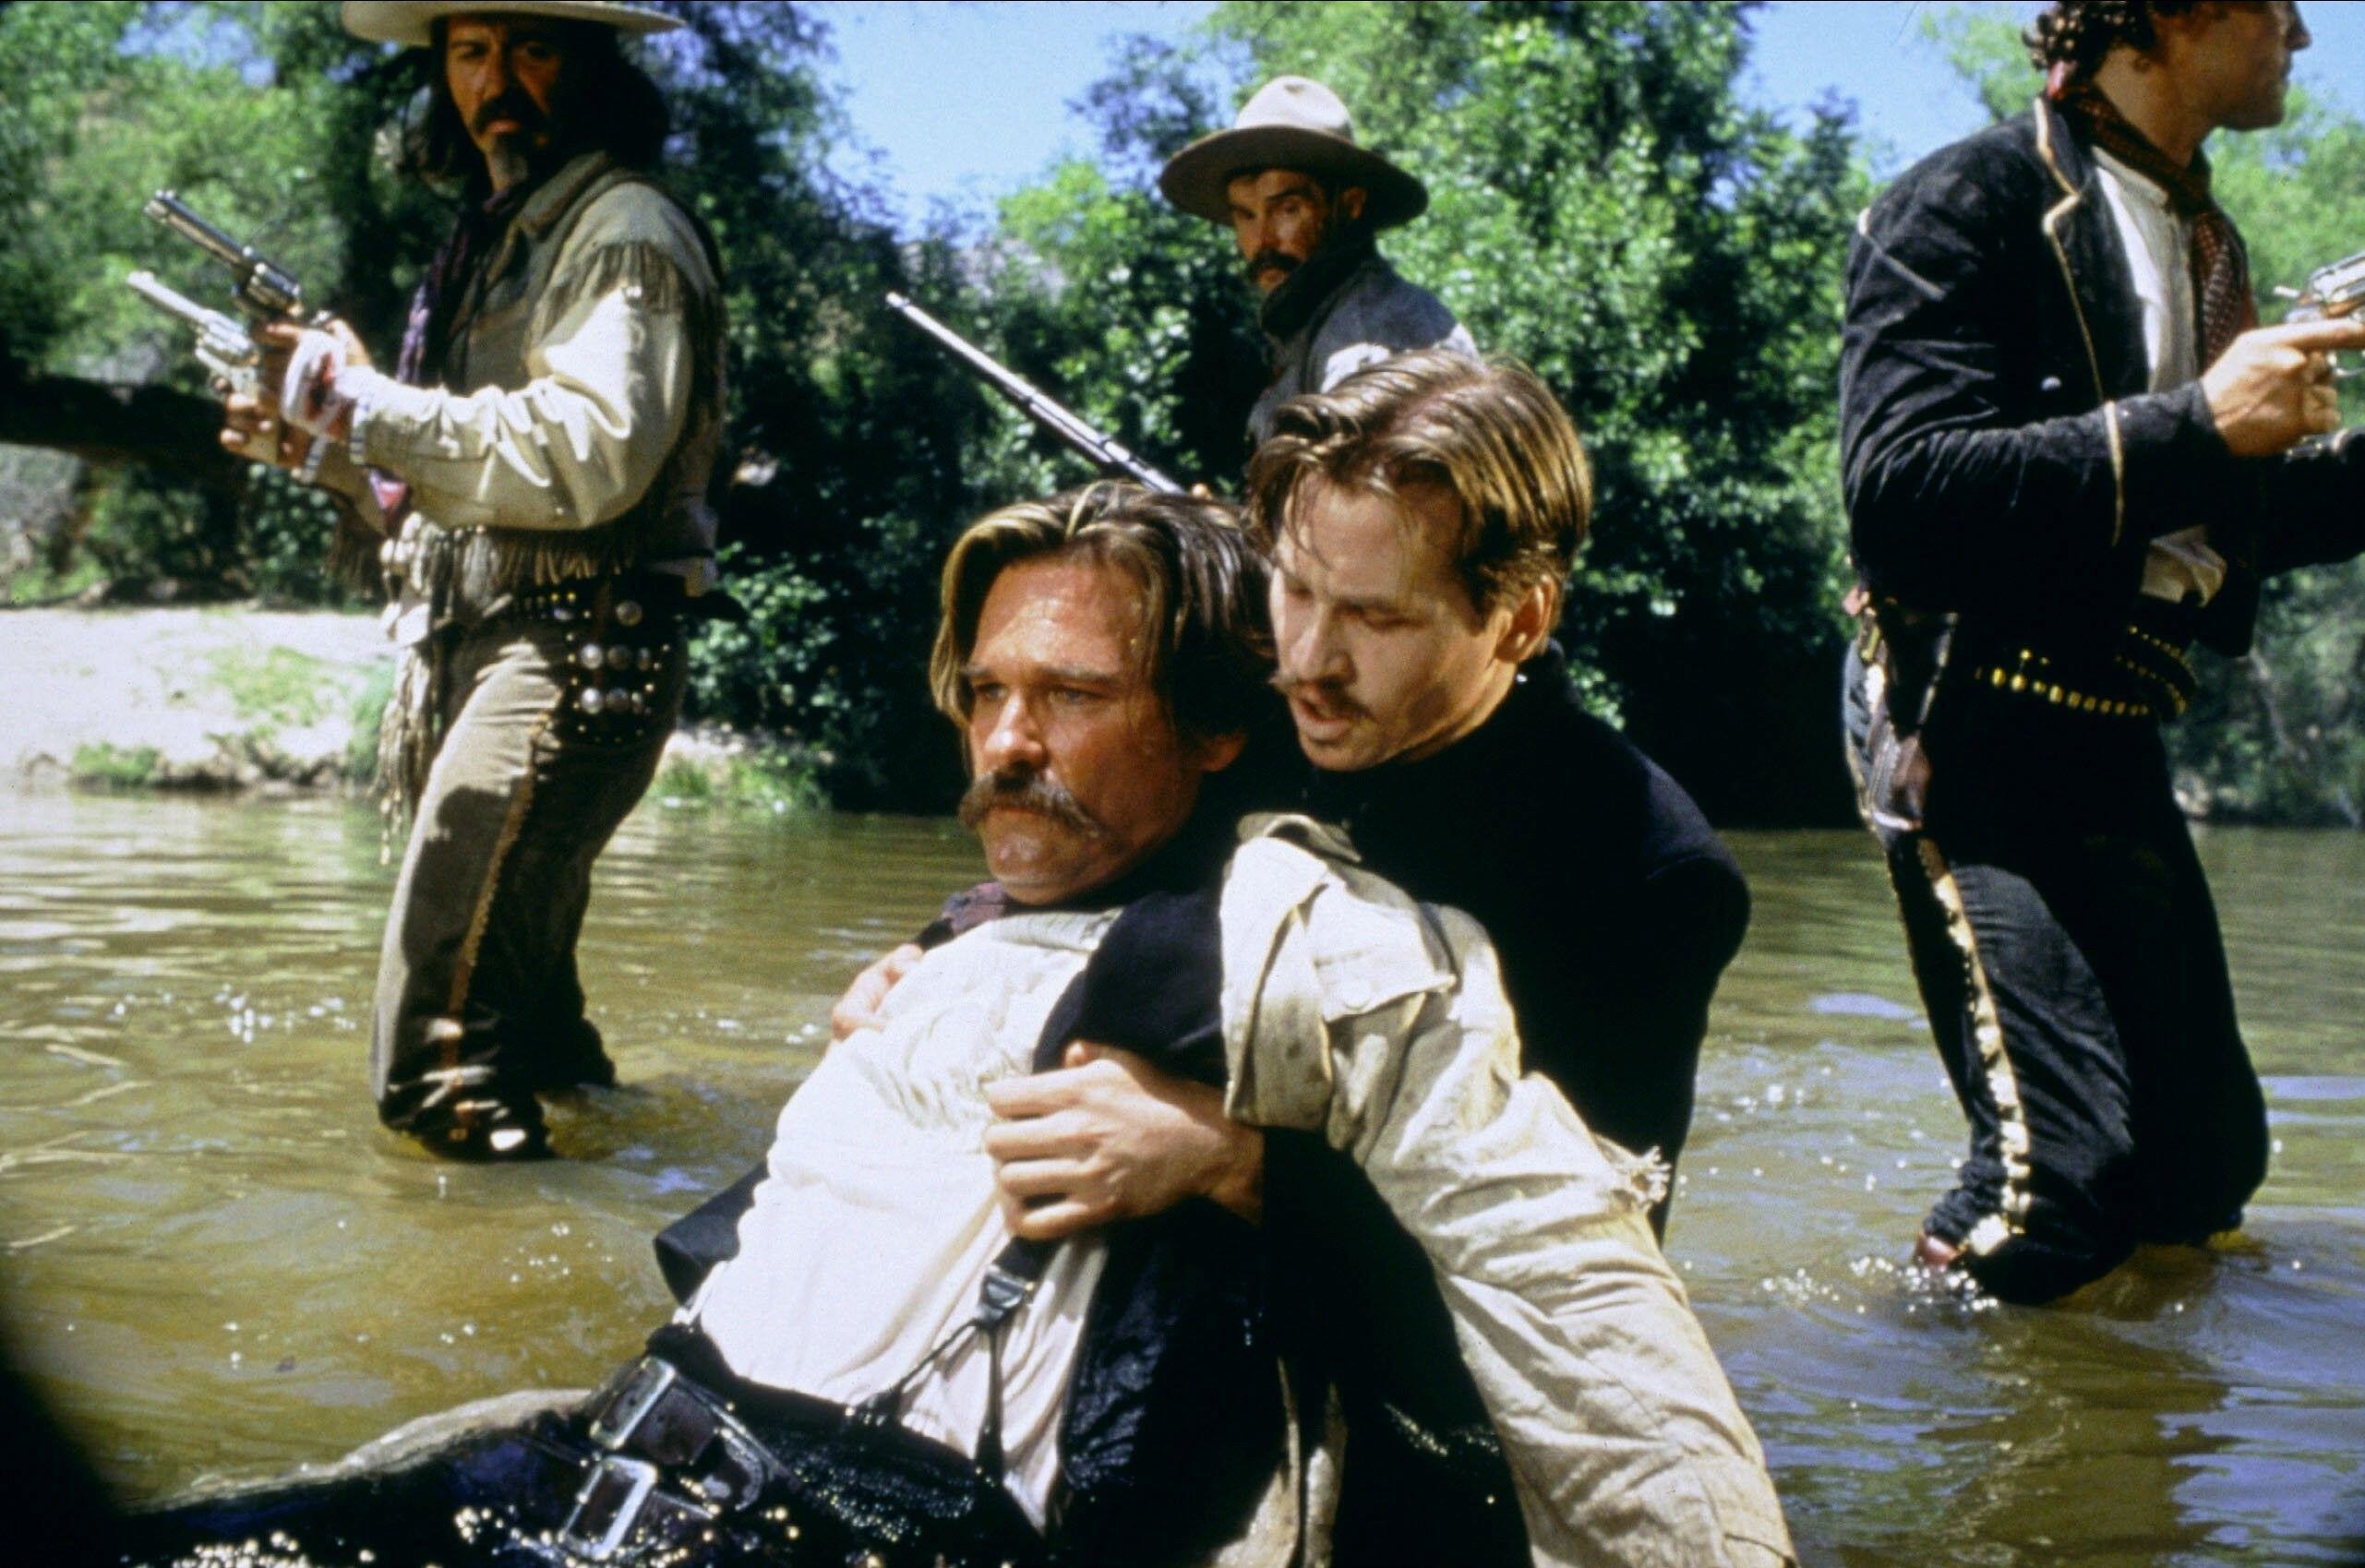 Val Kilmer holds Kurt Russell after the latter fell in a river